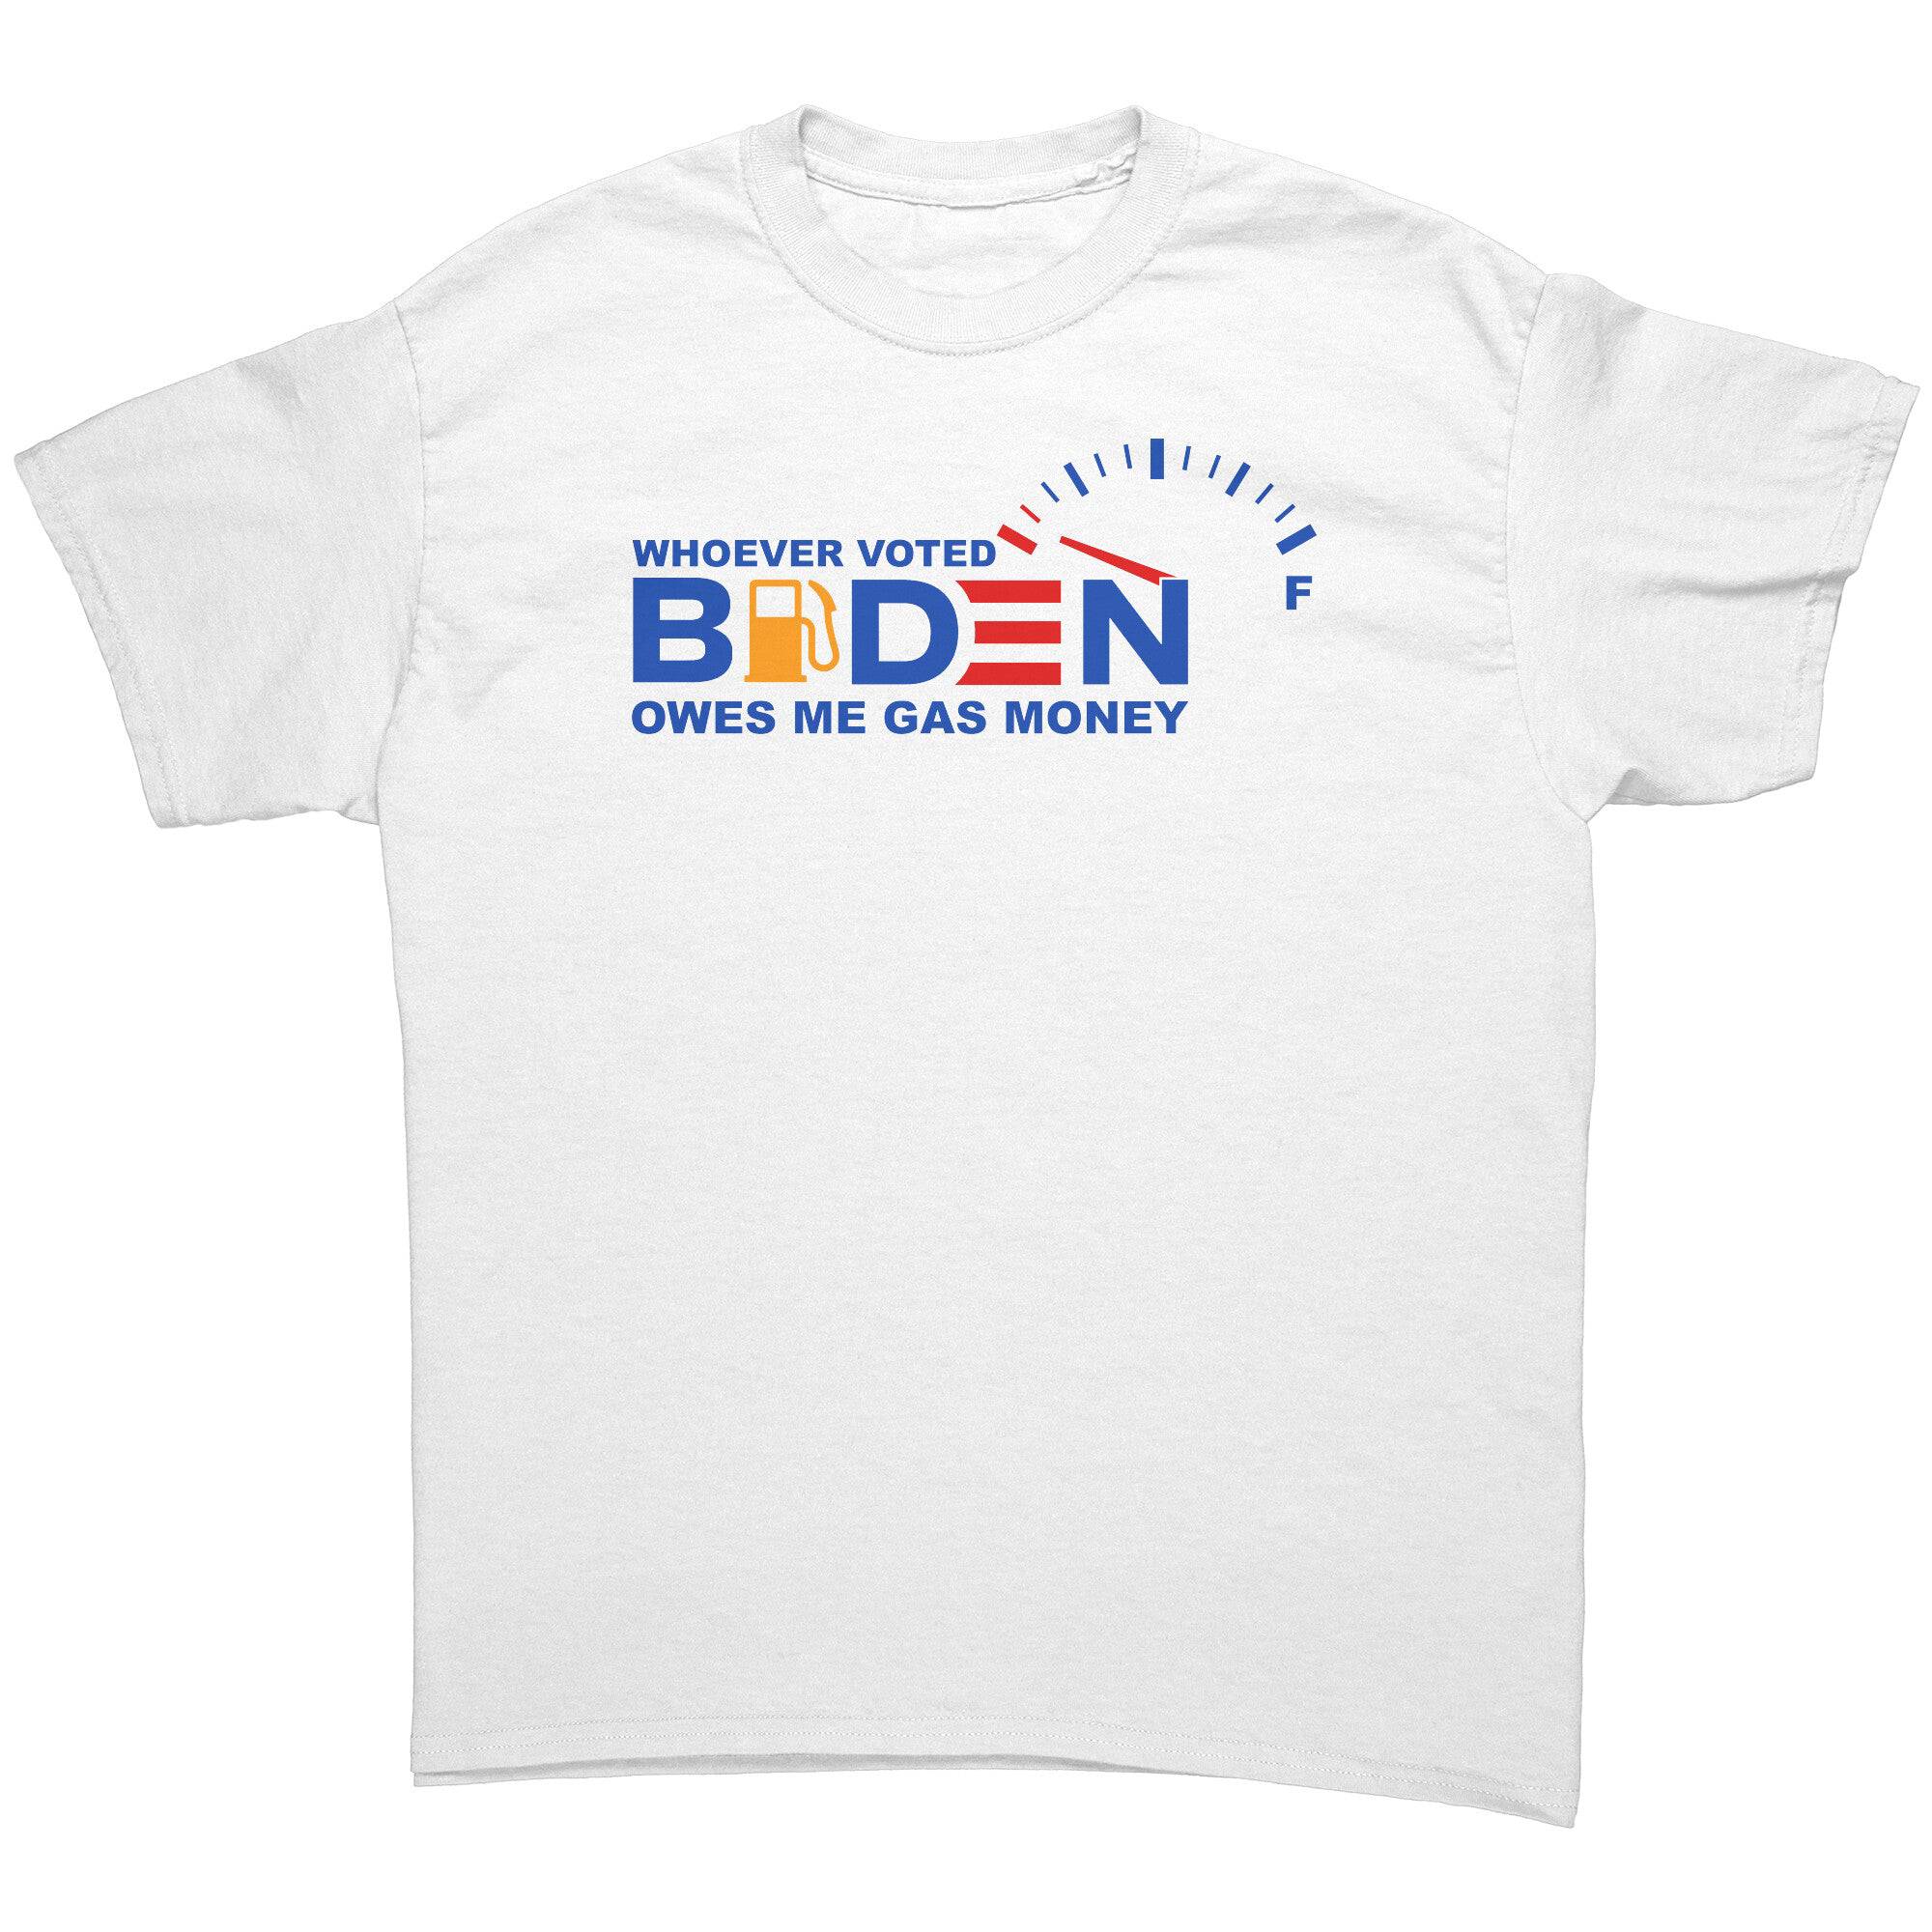 Whoever Voted Biden Owes Me Gas Money -Apparel | Drunk America 